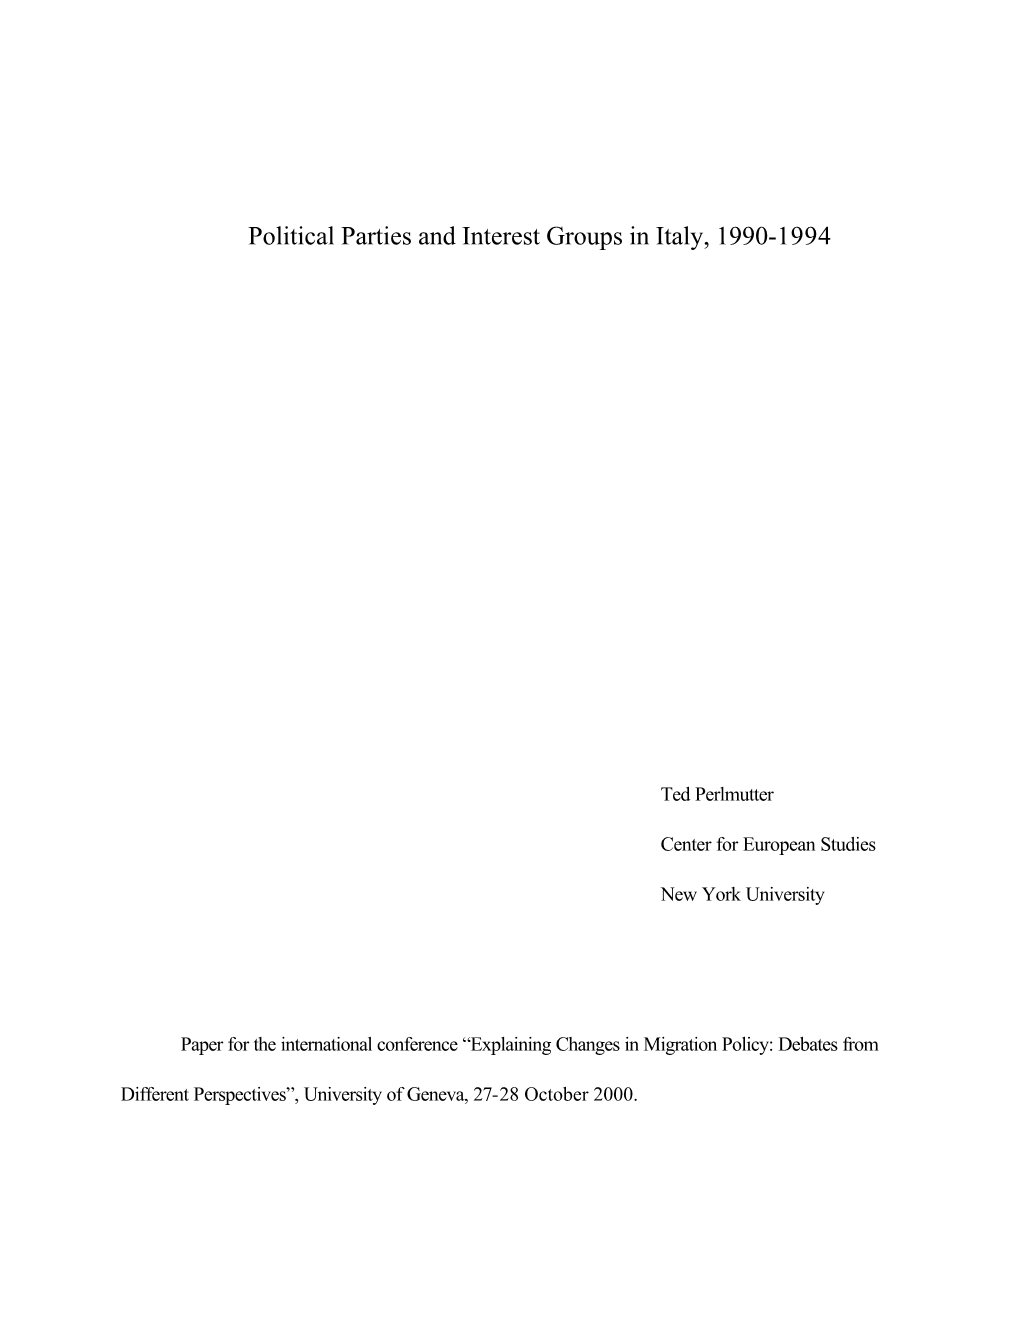 Political Parties and Interest Groups in Italy, 1990-1994